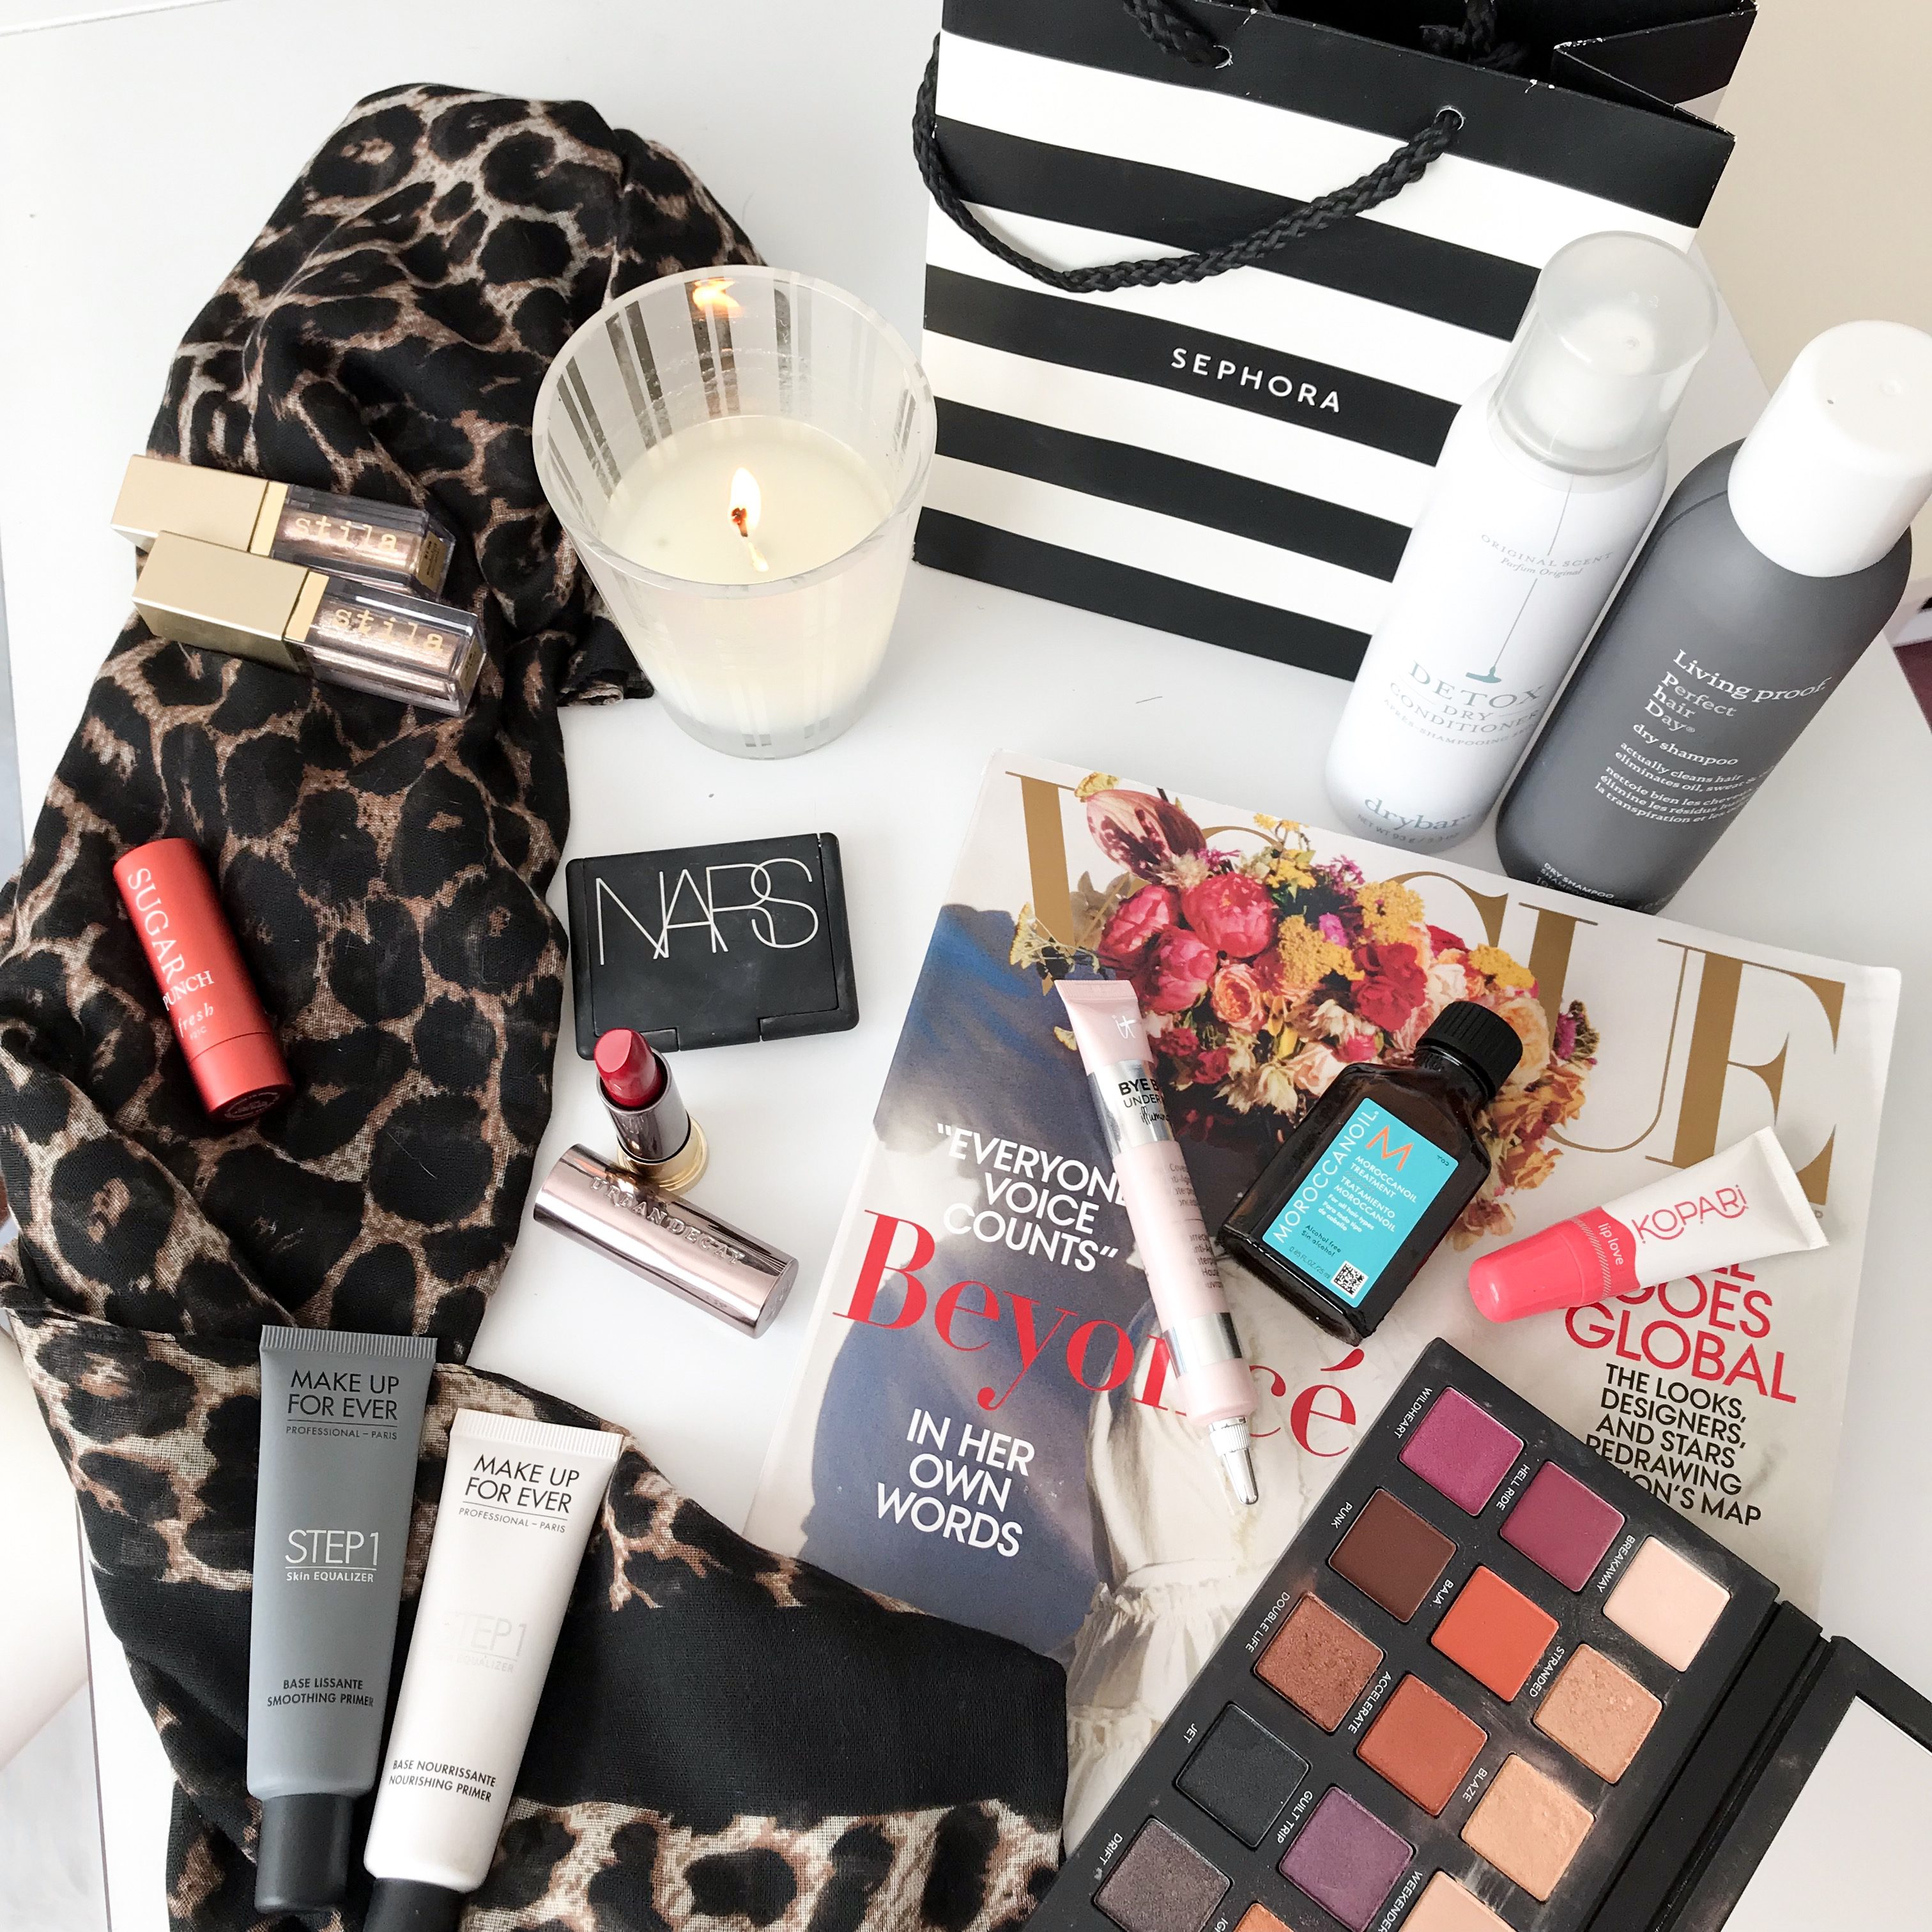 My Must-Have Sephora Products Under $25 - SEPHORA SALE TIME